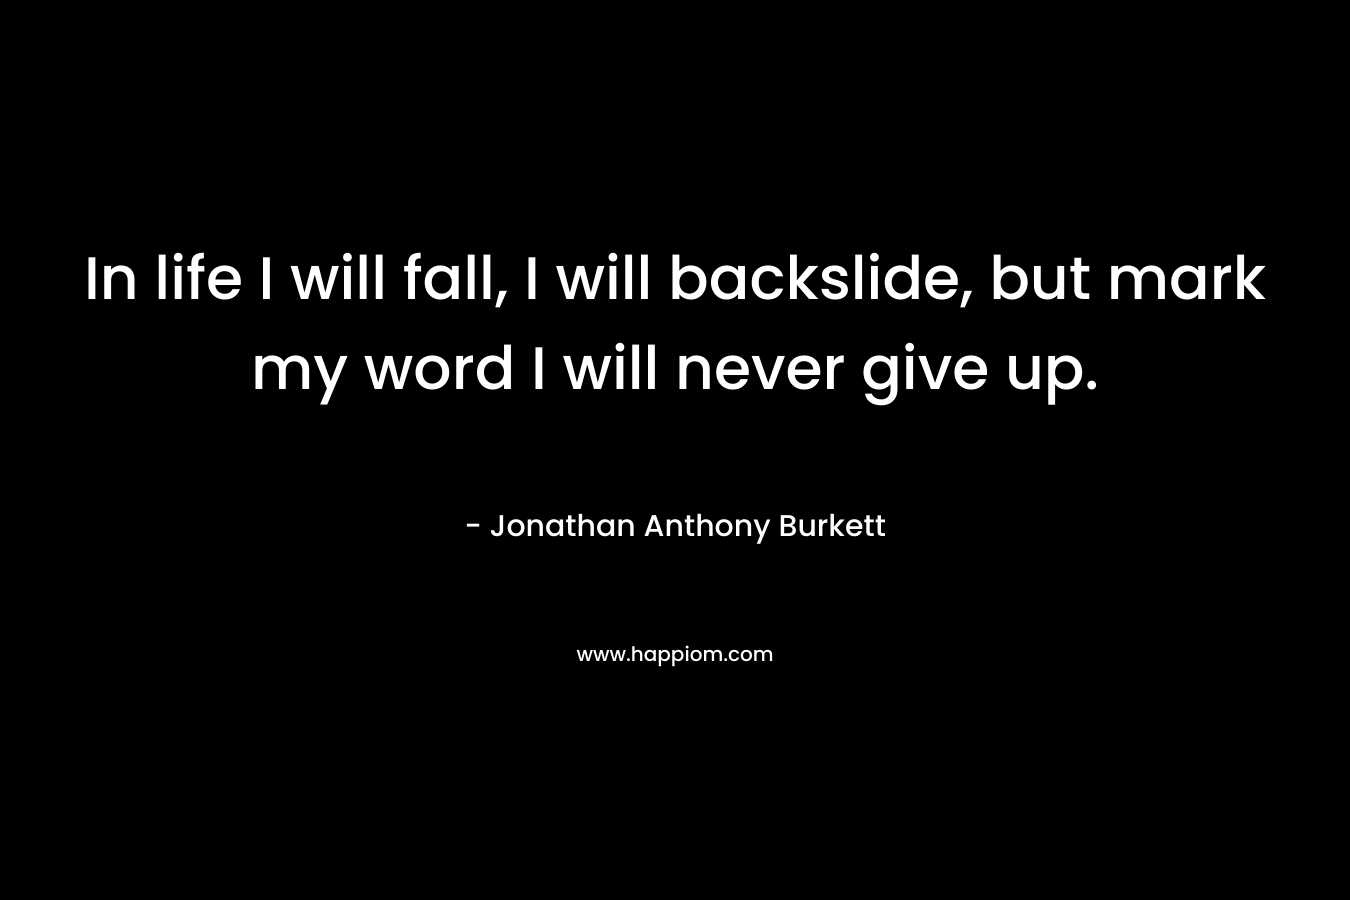 In life I will fall, I will backslide, but mark my word I will never give up. – Jonathan Anthony Burkett